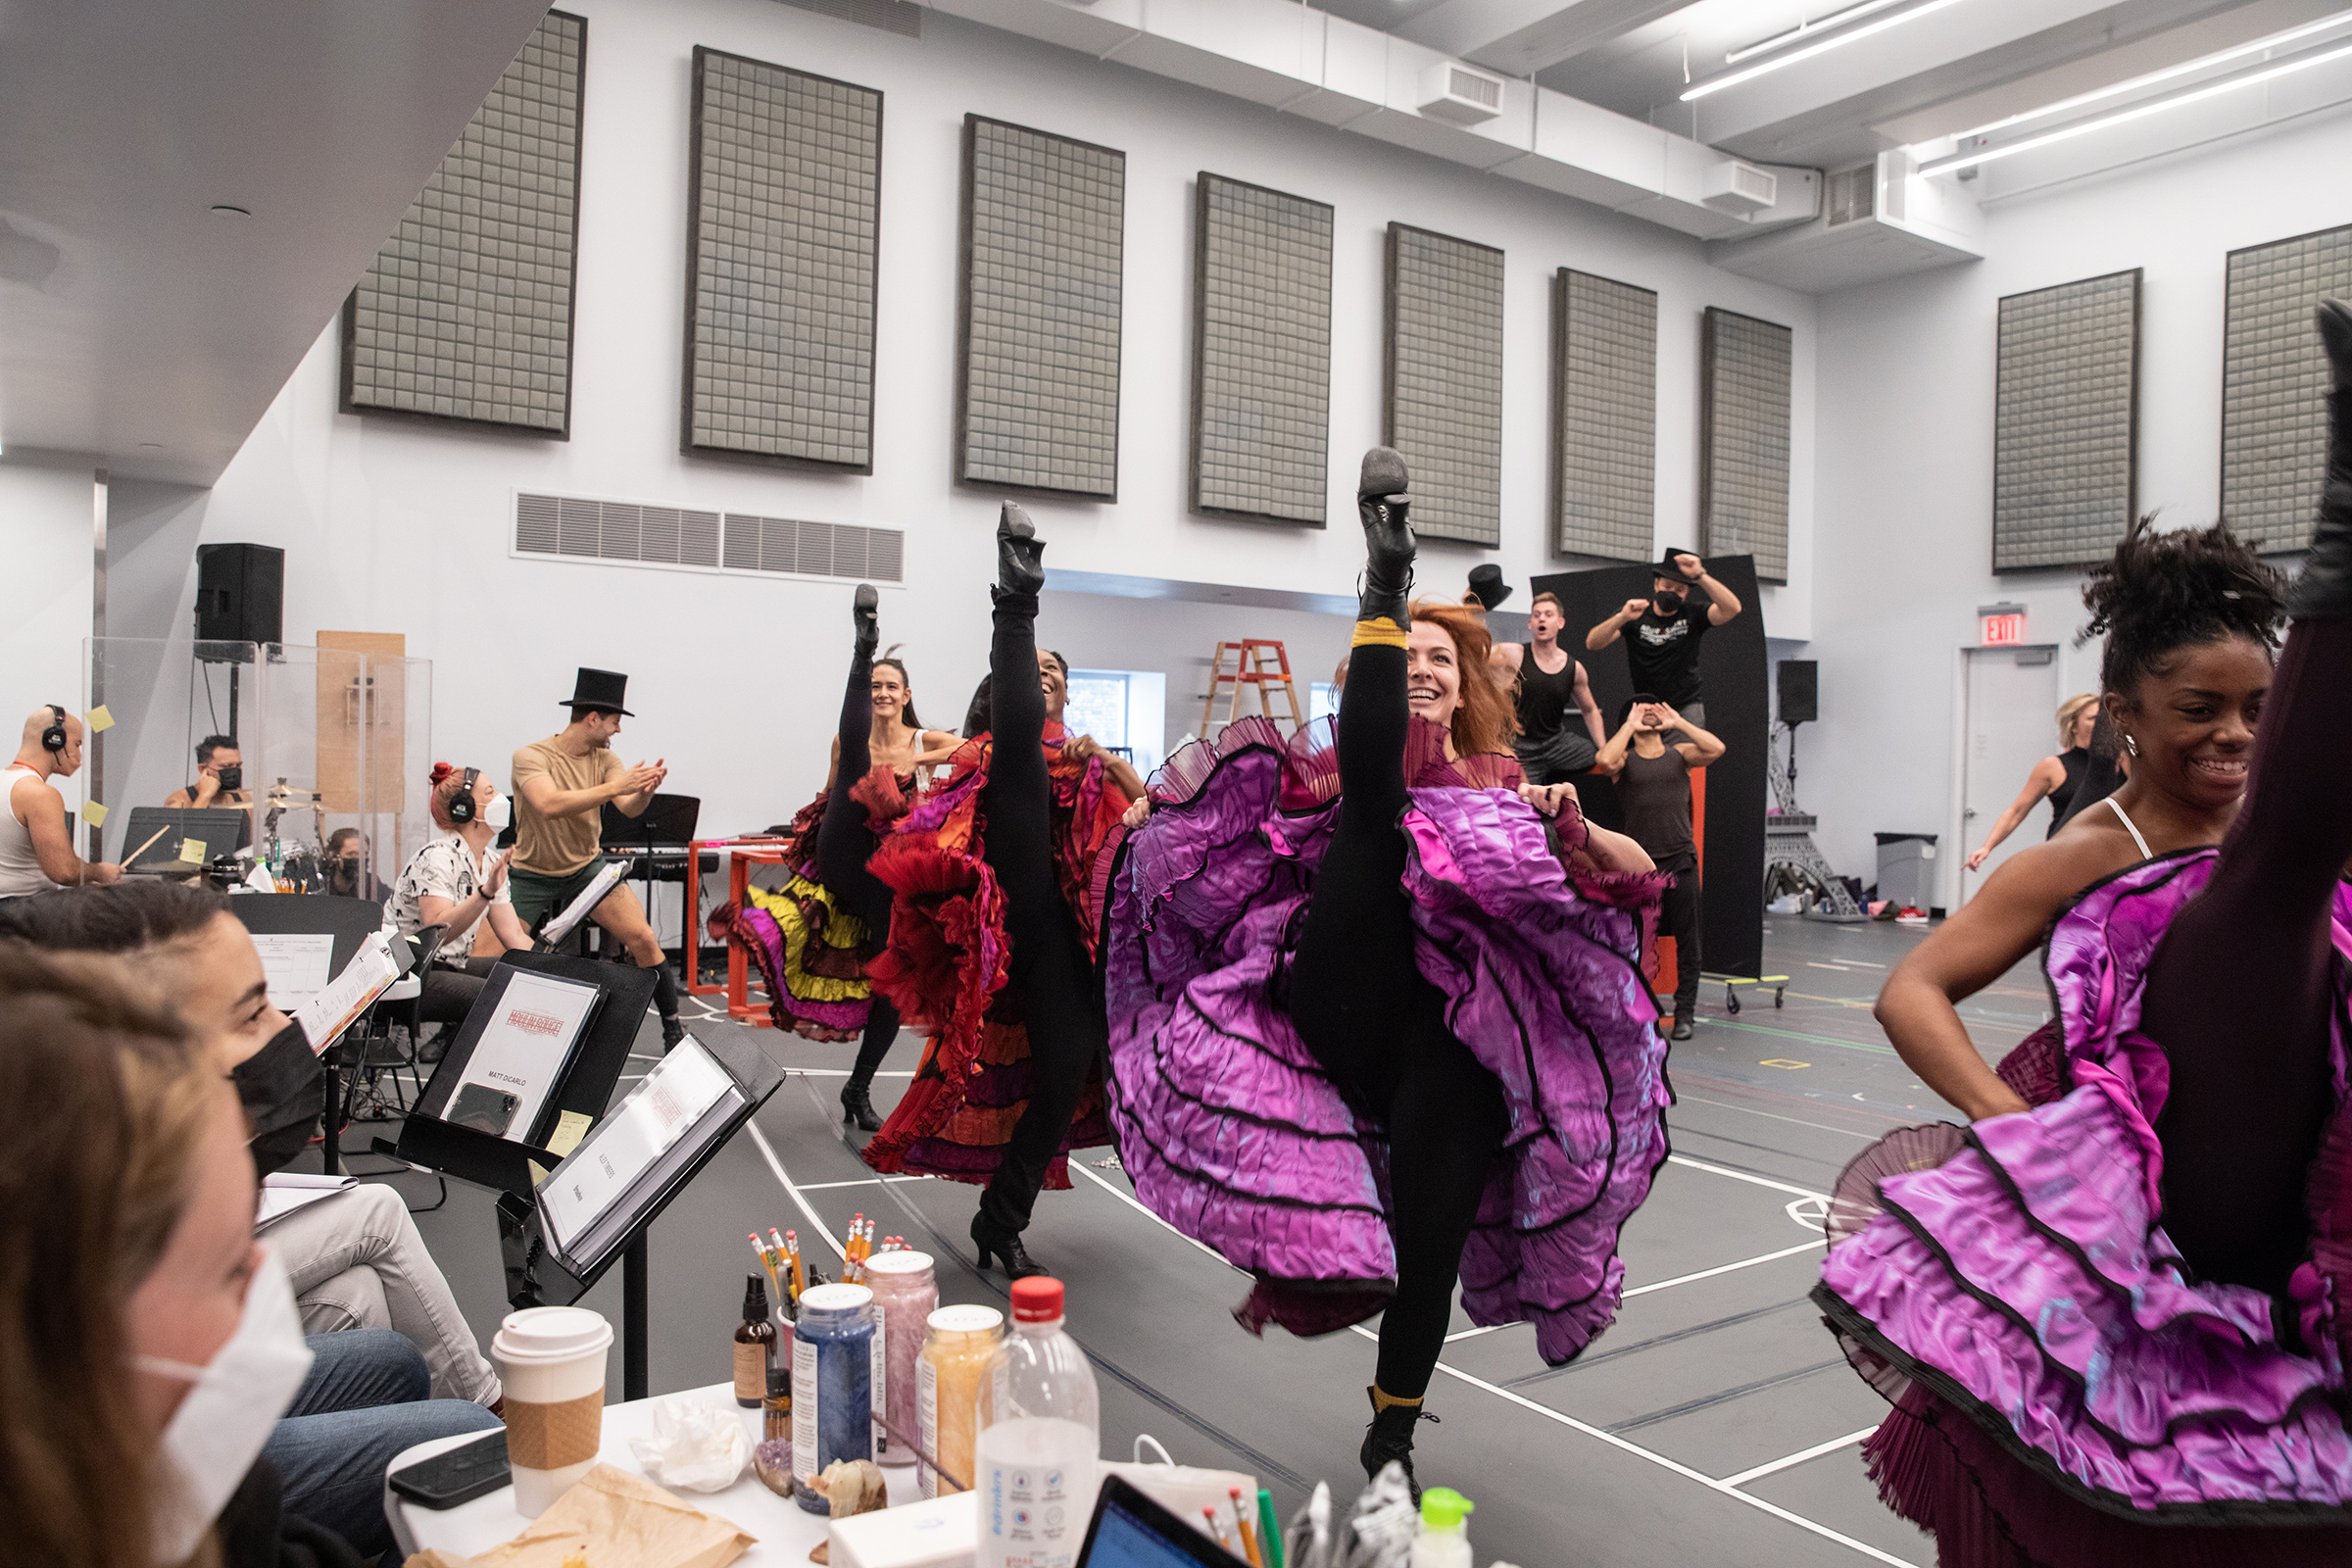 Ensemble members doing the can-can during the Moulin Rouge! The Musical run-through in the studio on Sept. 12, 2021 in New York, NY.